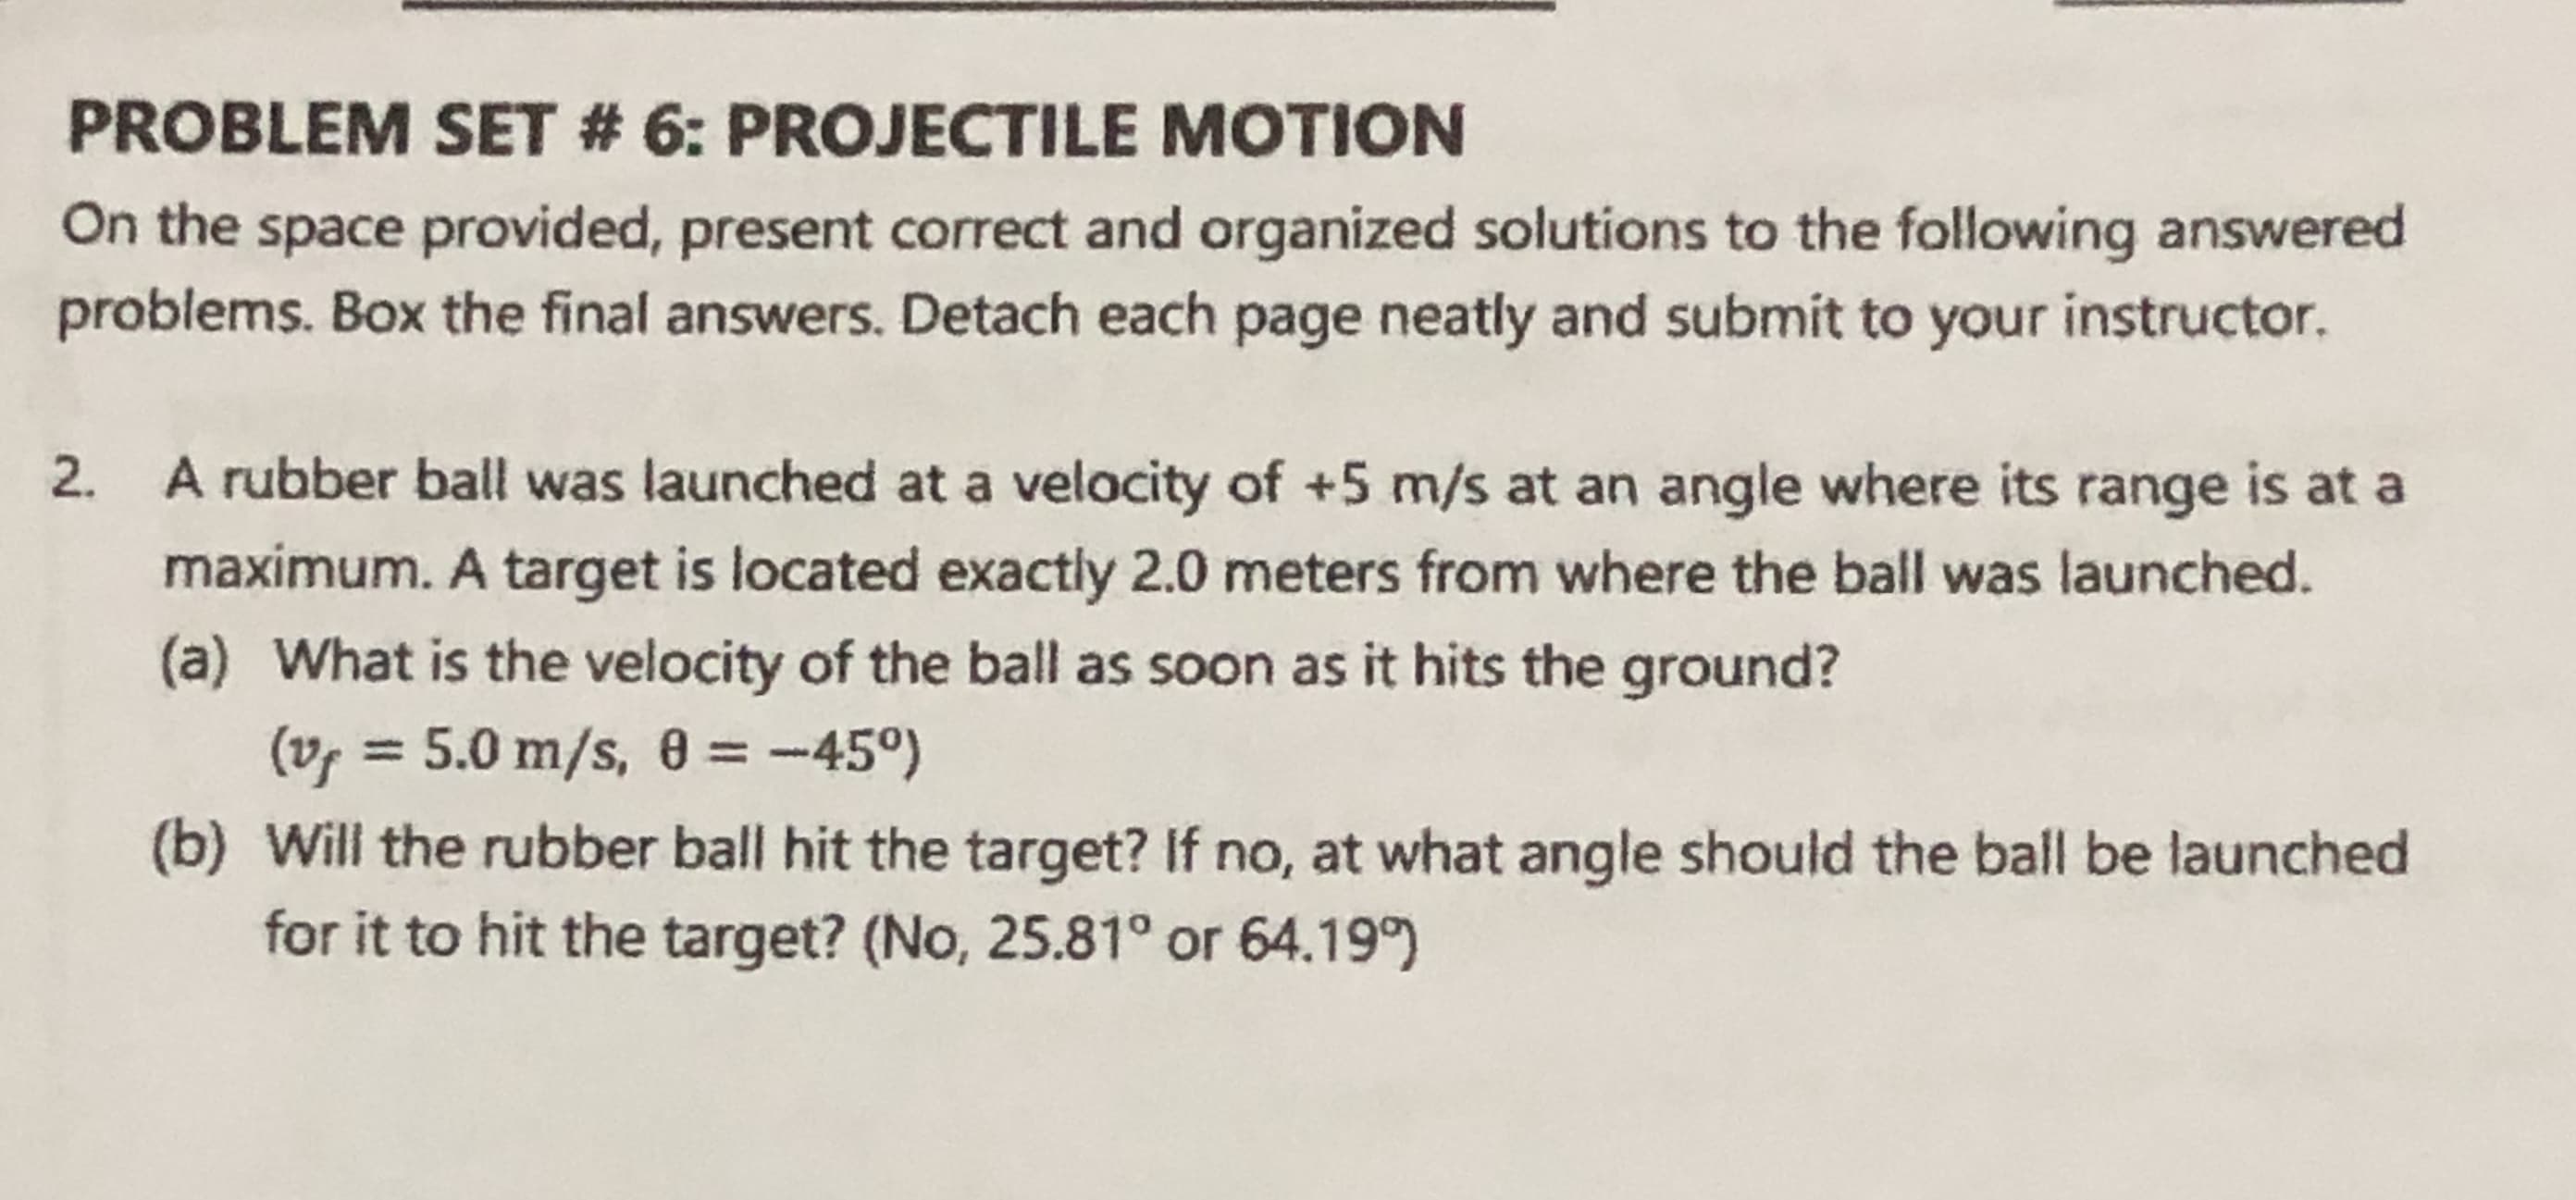 A rubber ball was launched at a velocity of +5 m/s at an angle where its range is at a
maximum. A target is located exactly 2.0 meters from where the ball was launched.
(a) What is the velocity of the ball as soon as it hits the ground?
(vf = 5.0 m/s, 0 = -45°)
(b) Will the rubber ball hit the target? If no, at what angle should the ball be launched
for it to hit the target? (No, 25.81° or 64.19°
